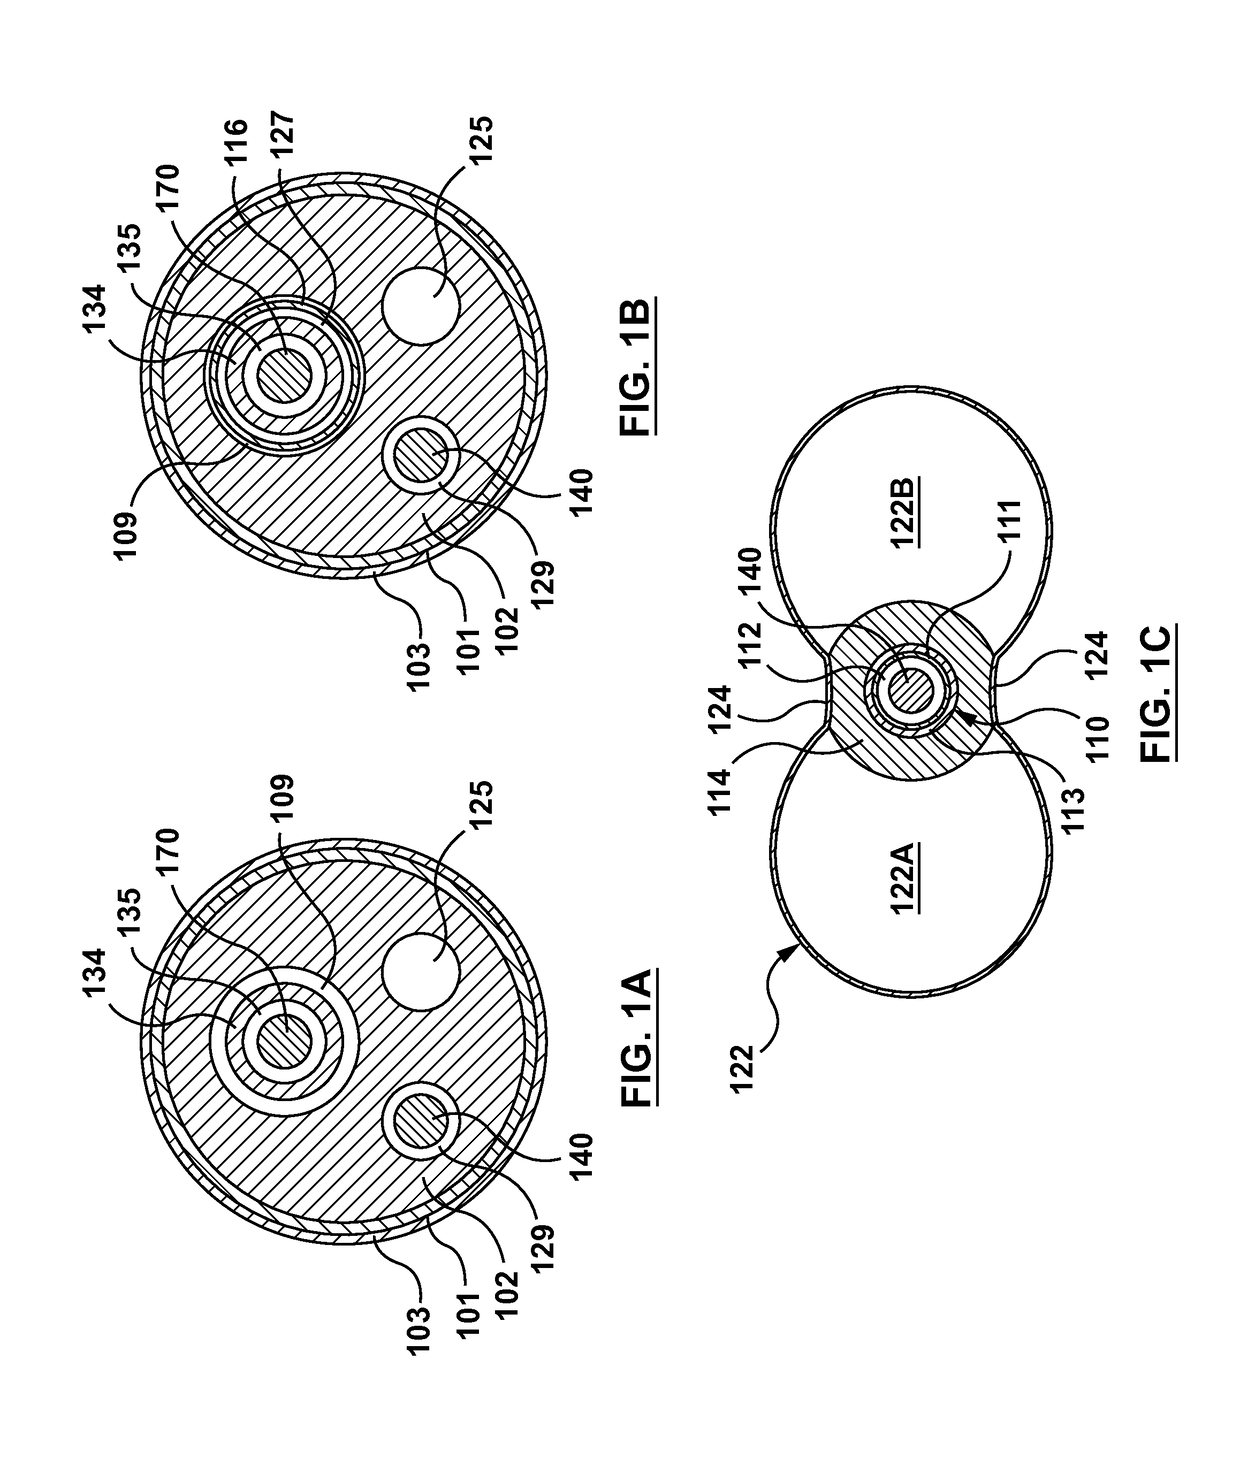 Occlusion Bypassing Apparatus With A Re-Entry Needle and a Distal Stabilization Balloon